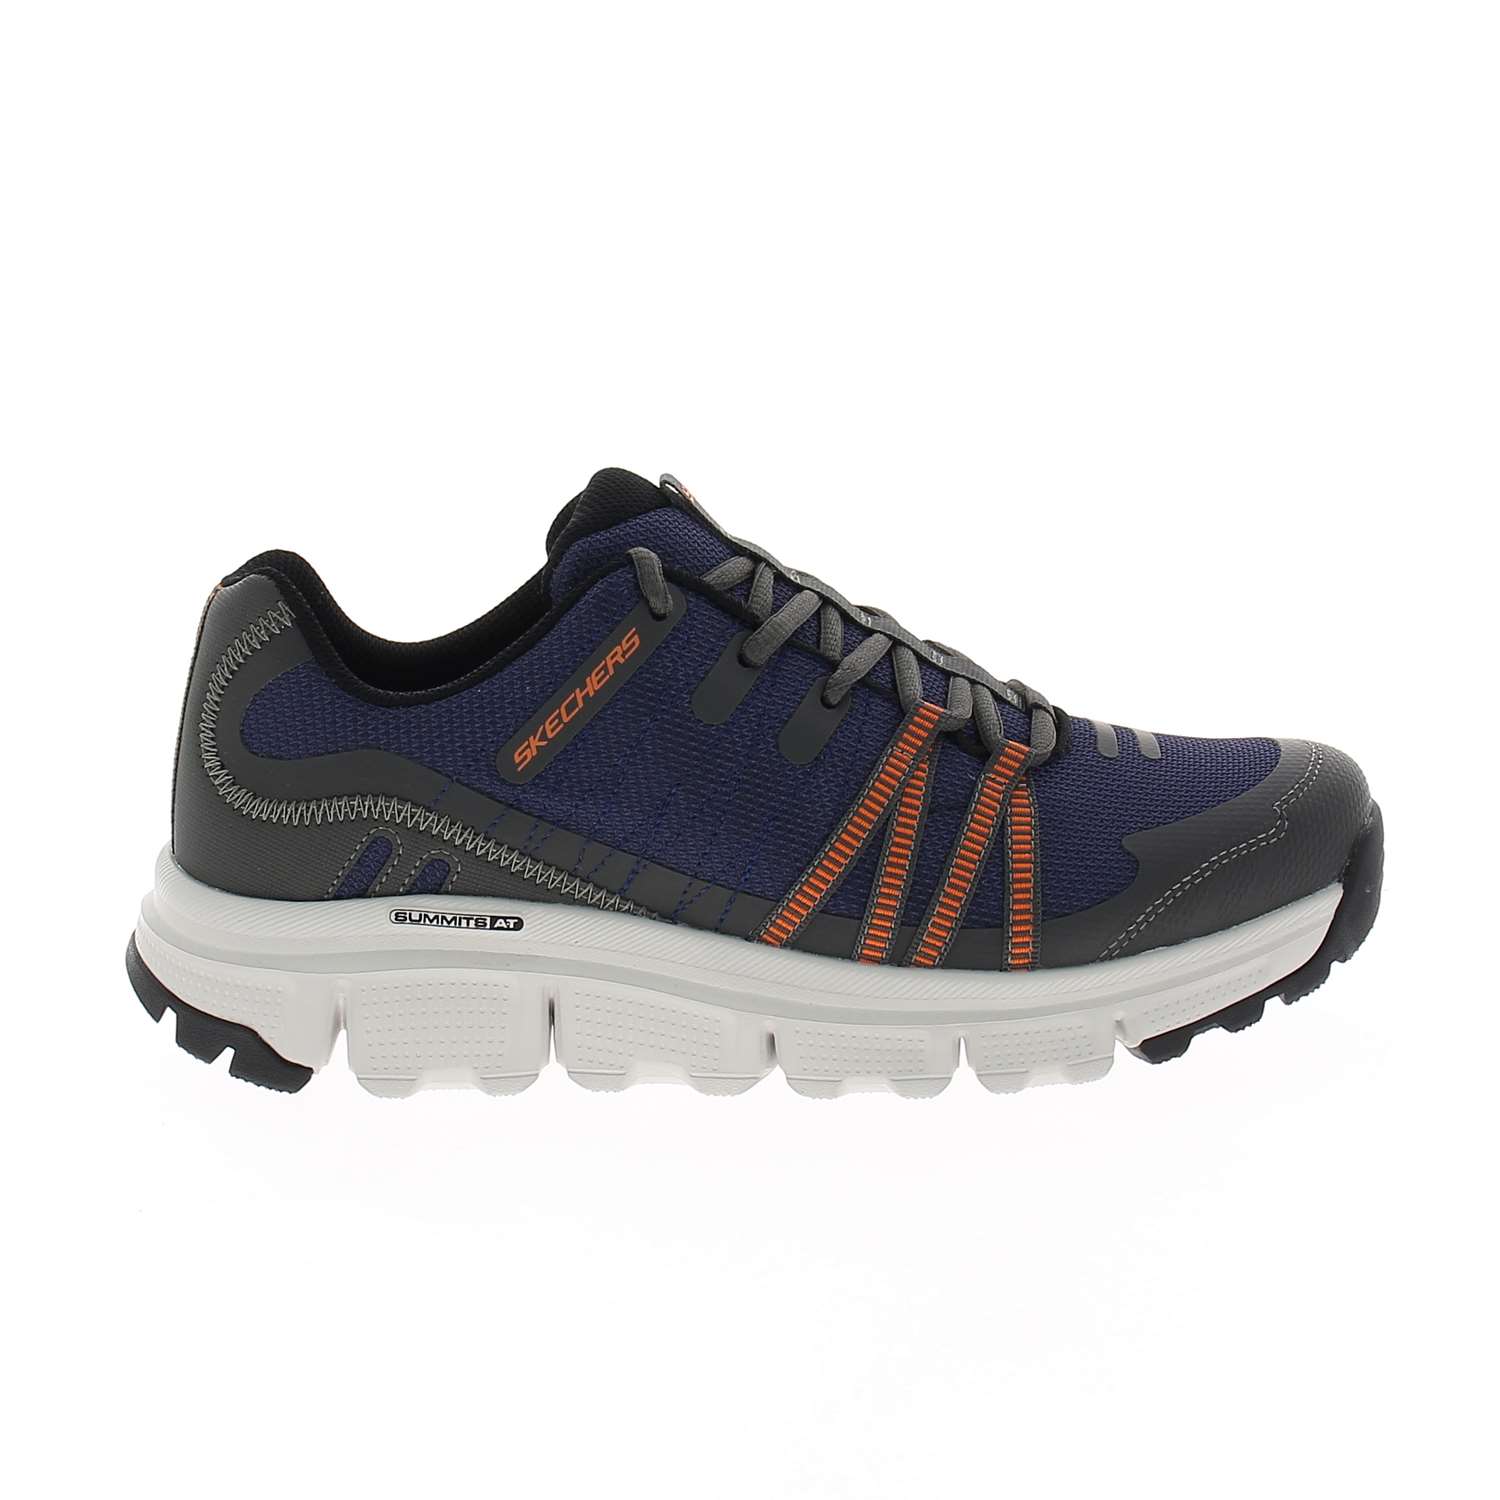 02 - SUMMITS AT - SKECHERS -  - Textile